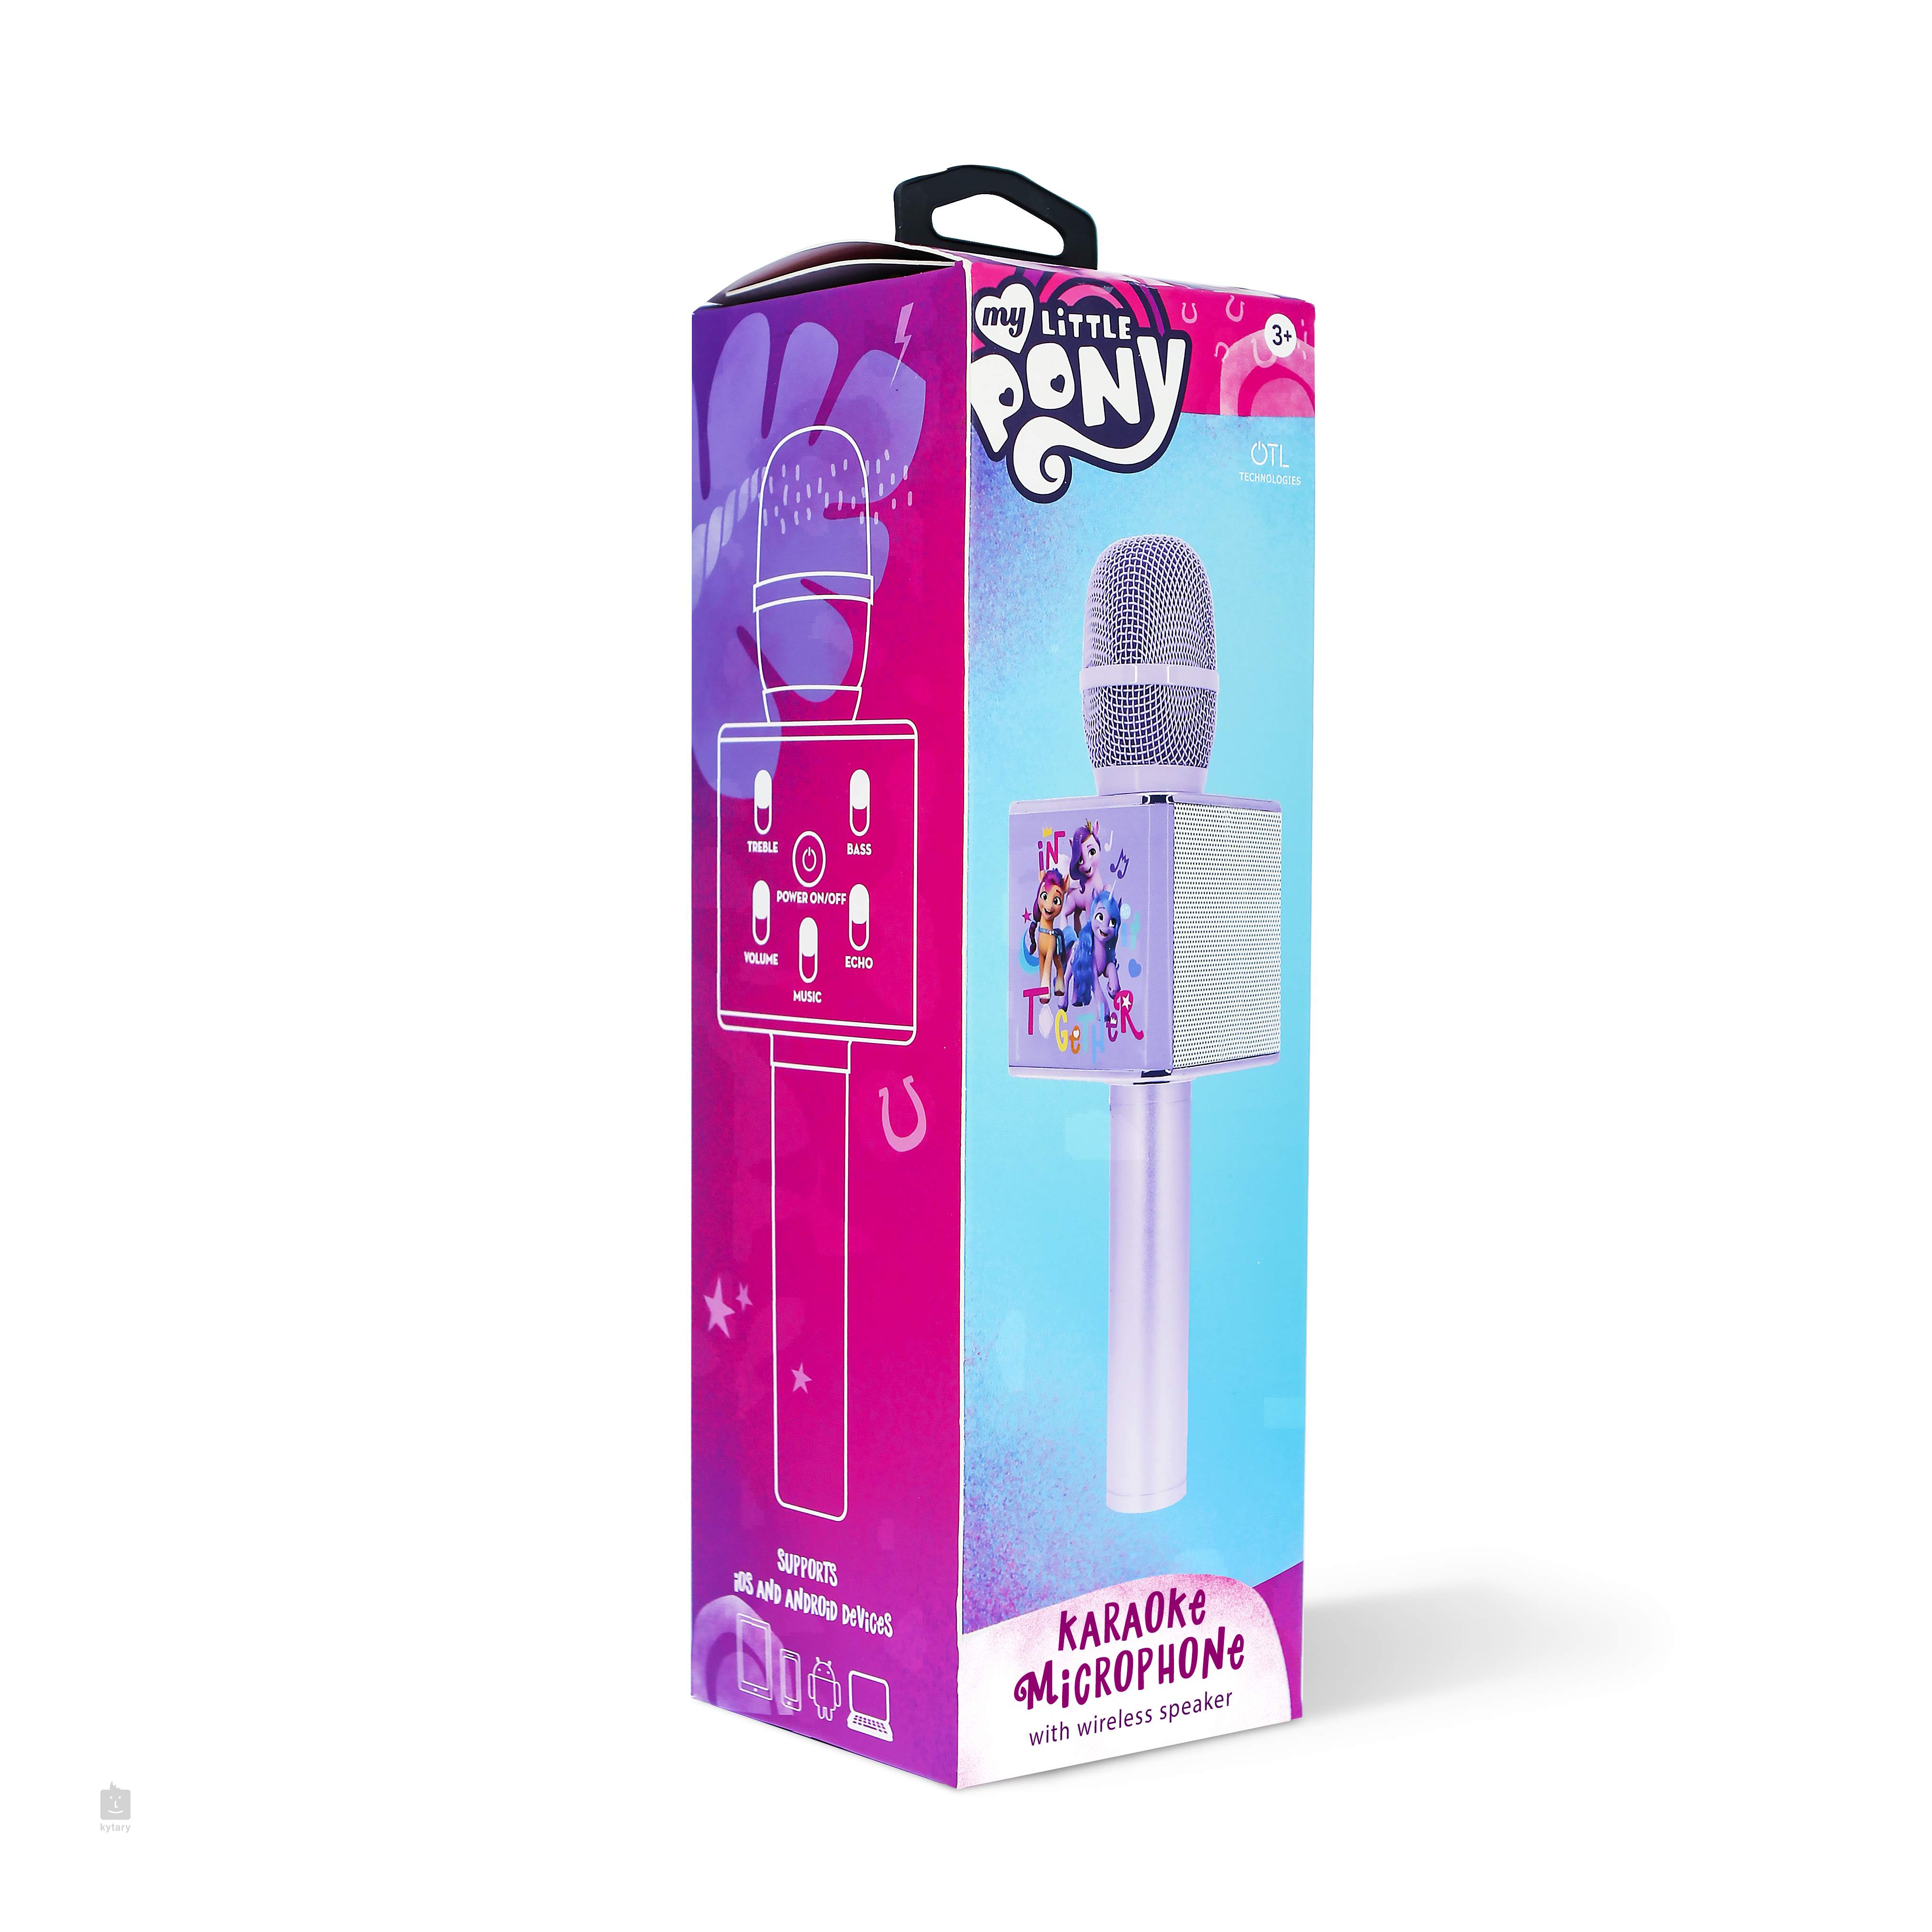 OTL Little Pony Karaoke microphone with Bluetooth Condenser Microphone